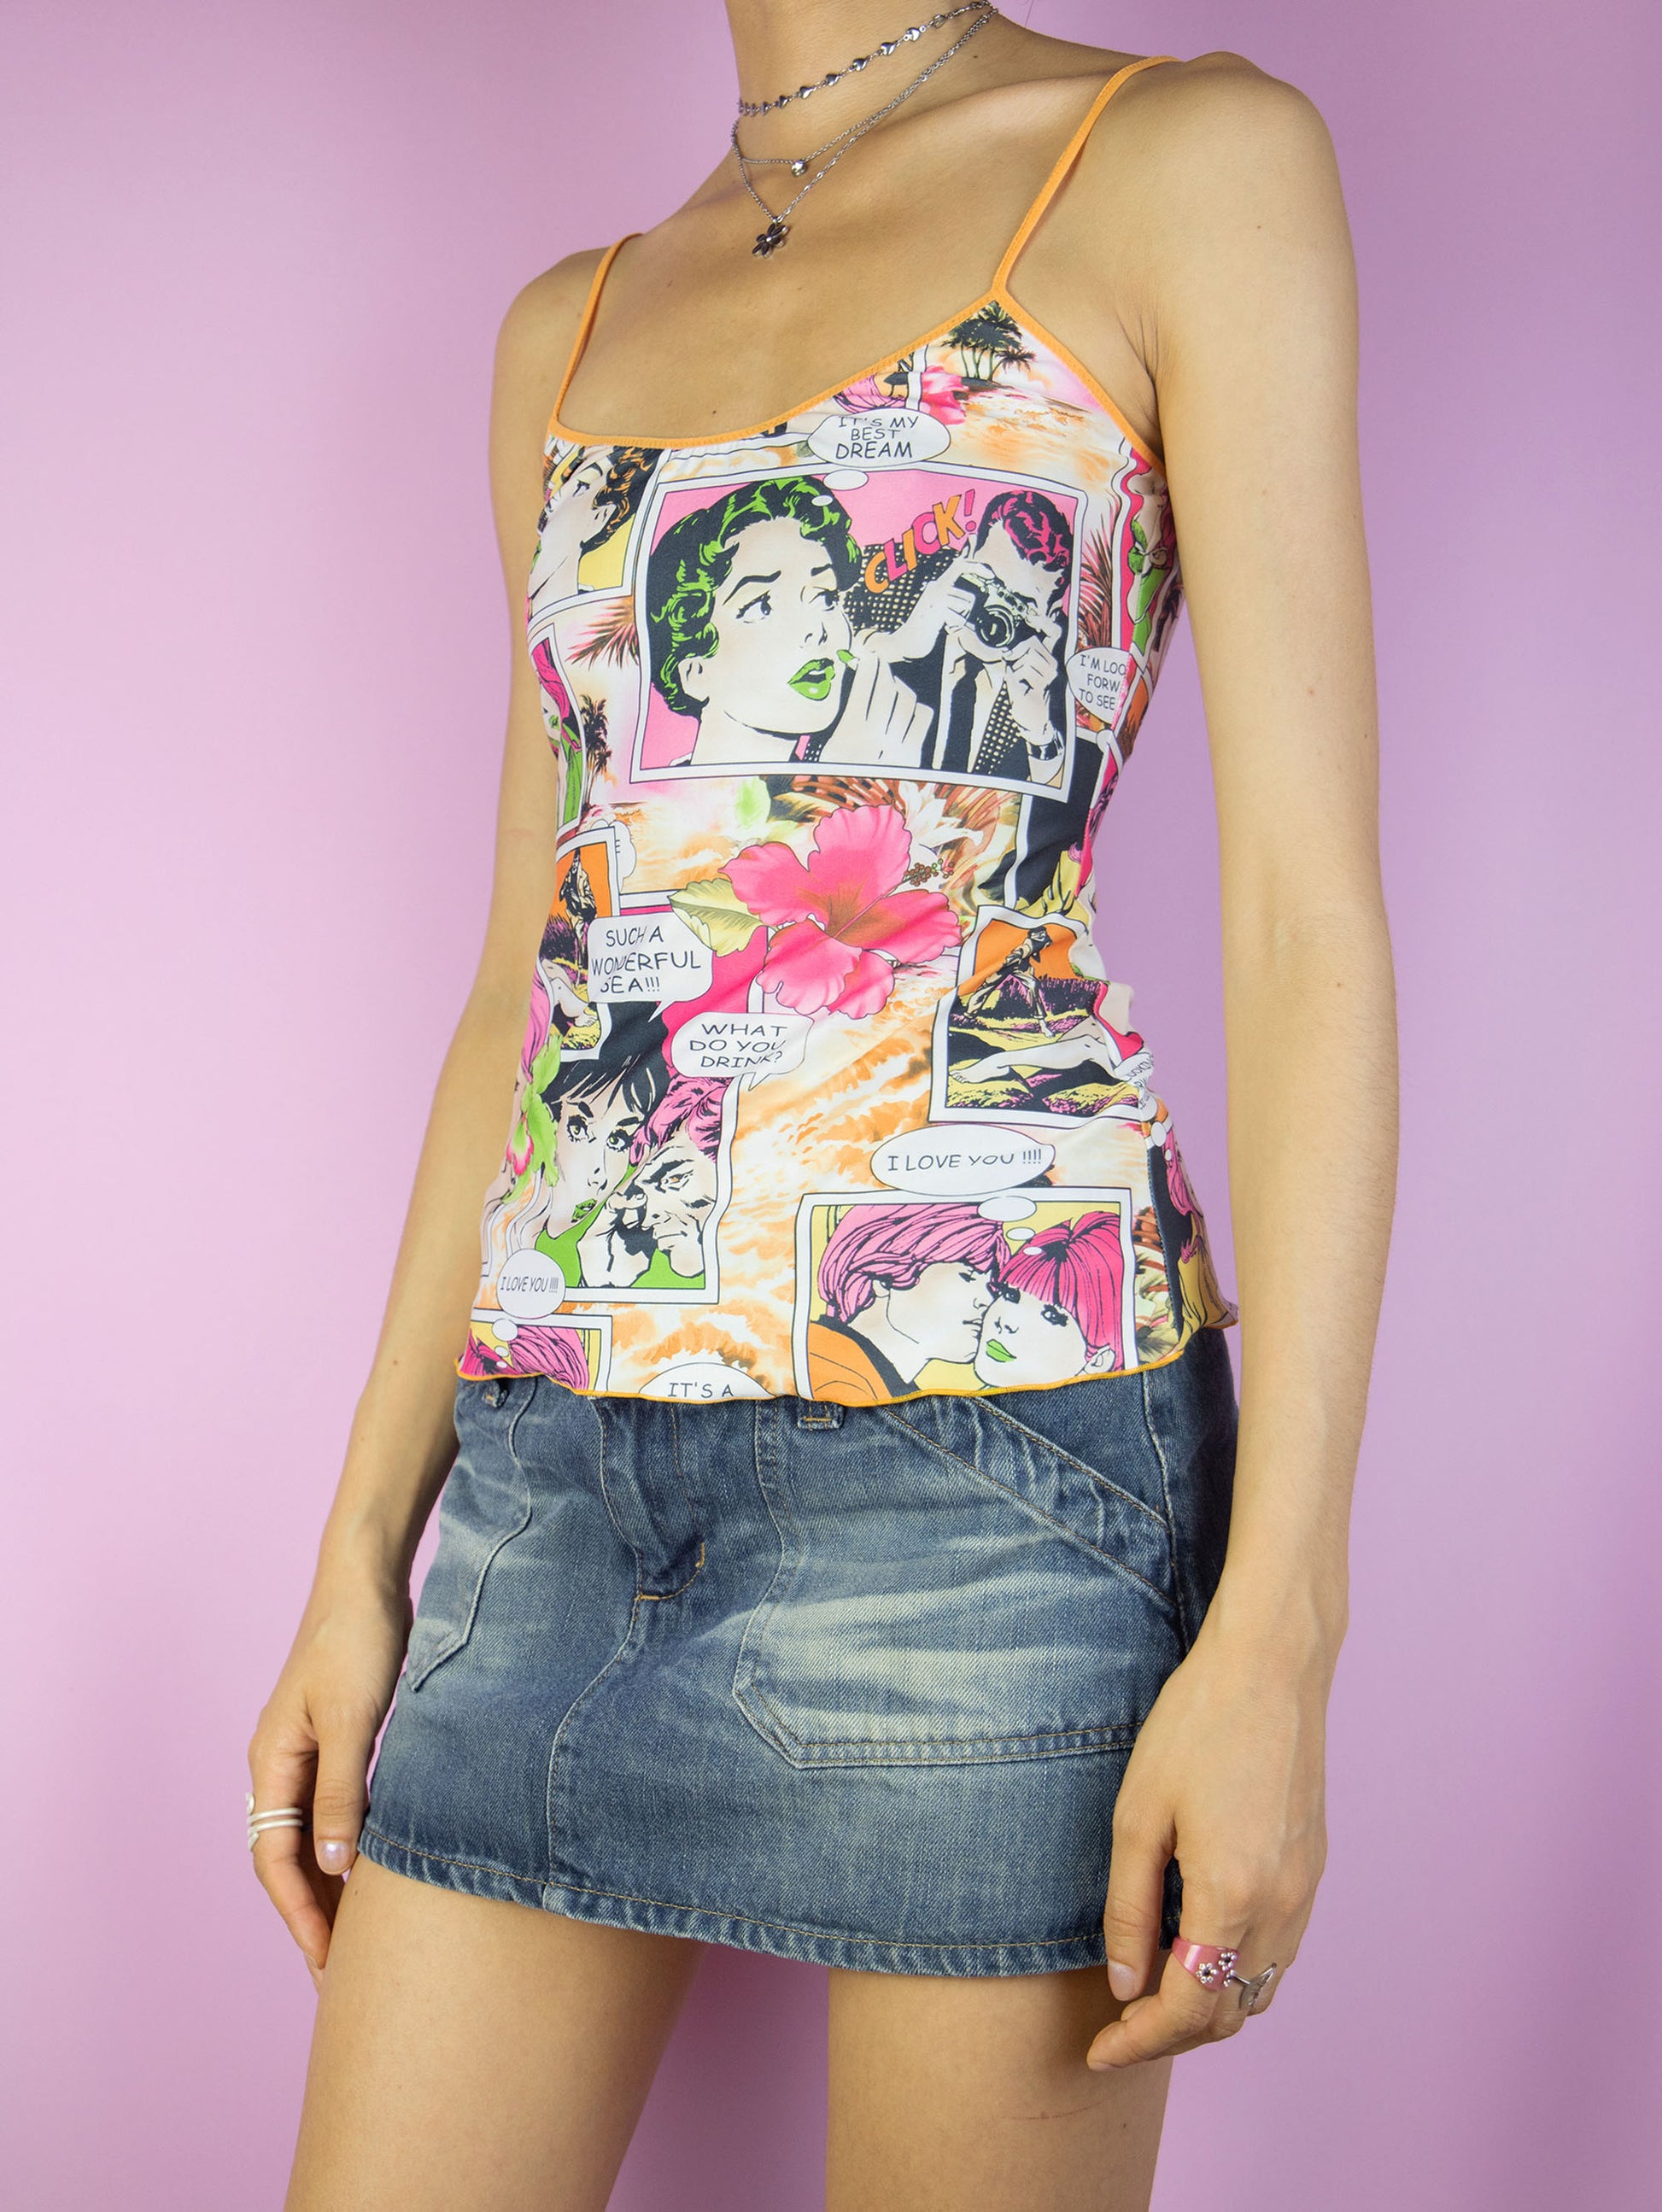 The Y2K Cartoon Comic Graphic Top is a vintage multicolored tank top with a cartoon comic print. Cyber retro 2000s summer top.